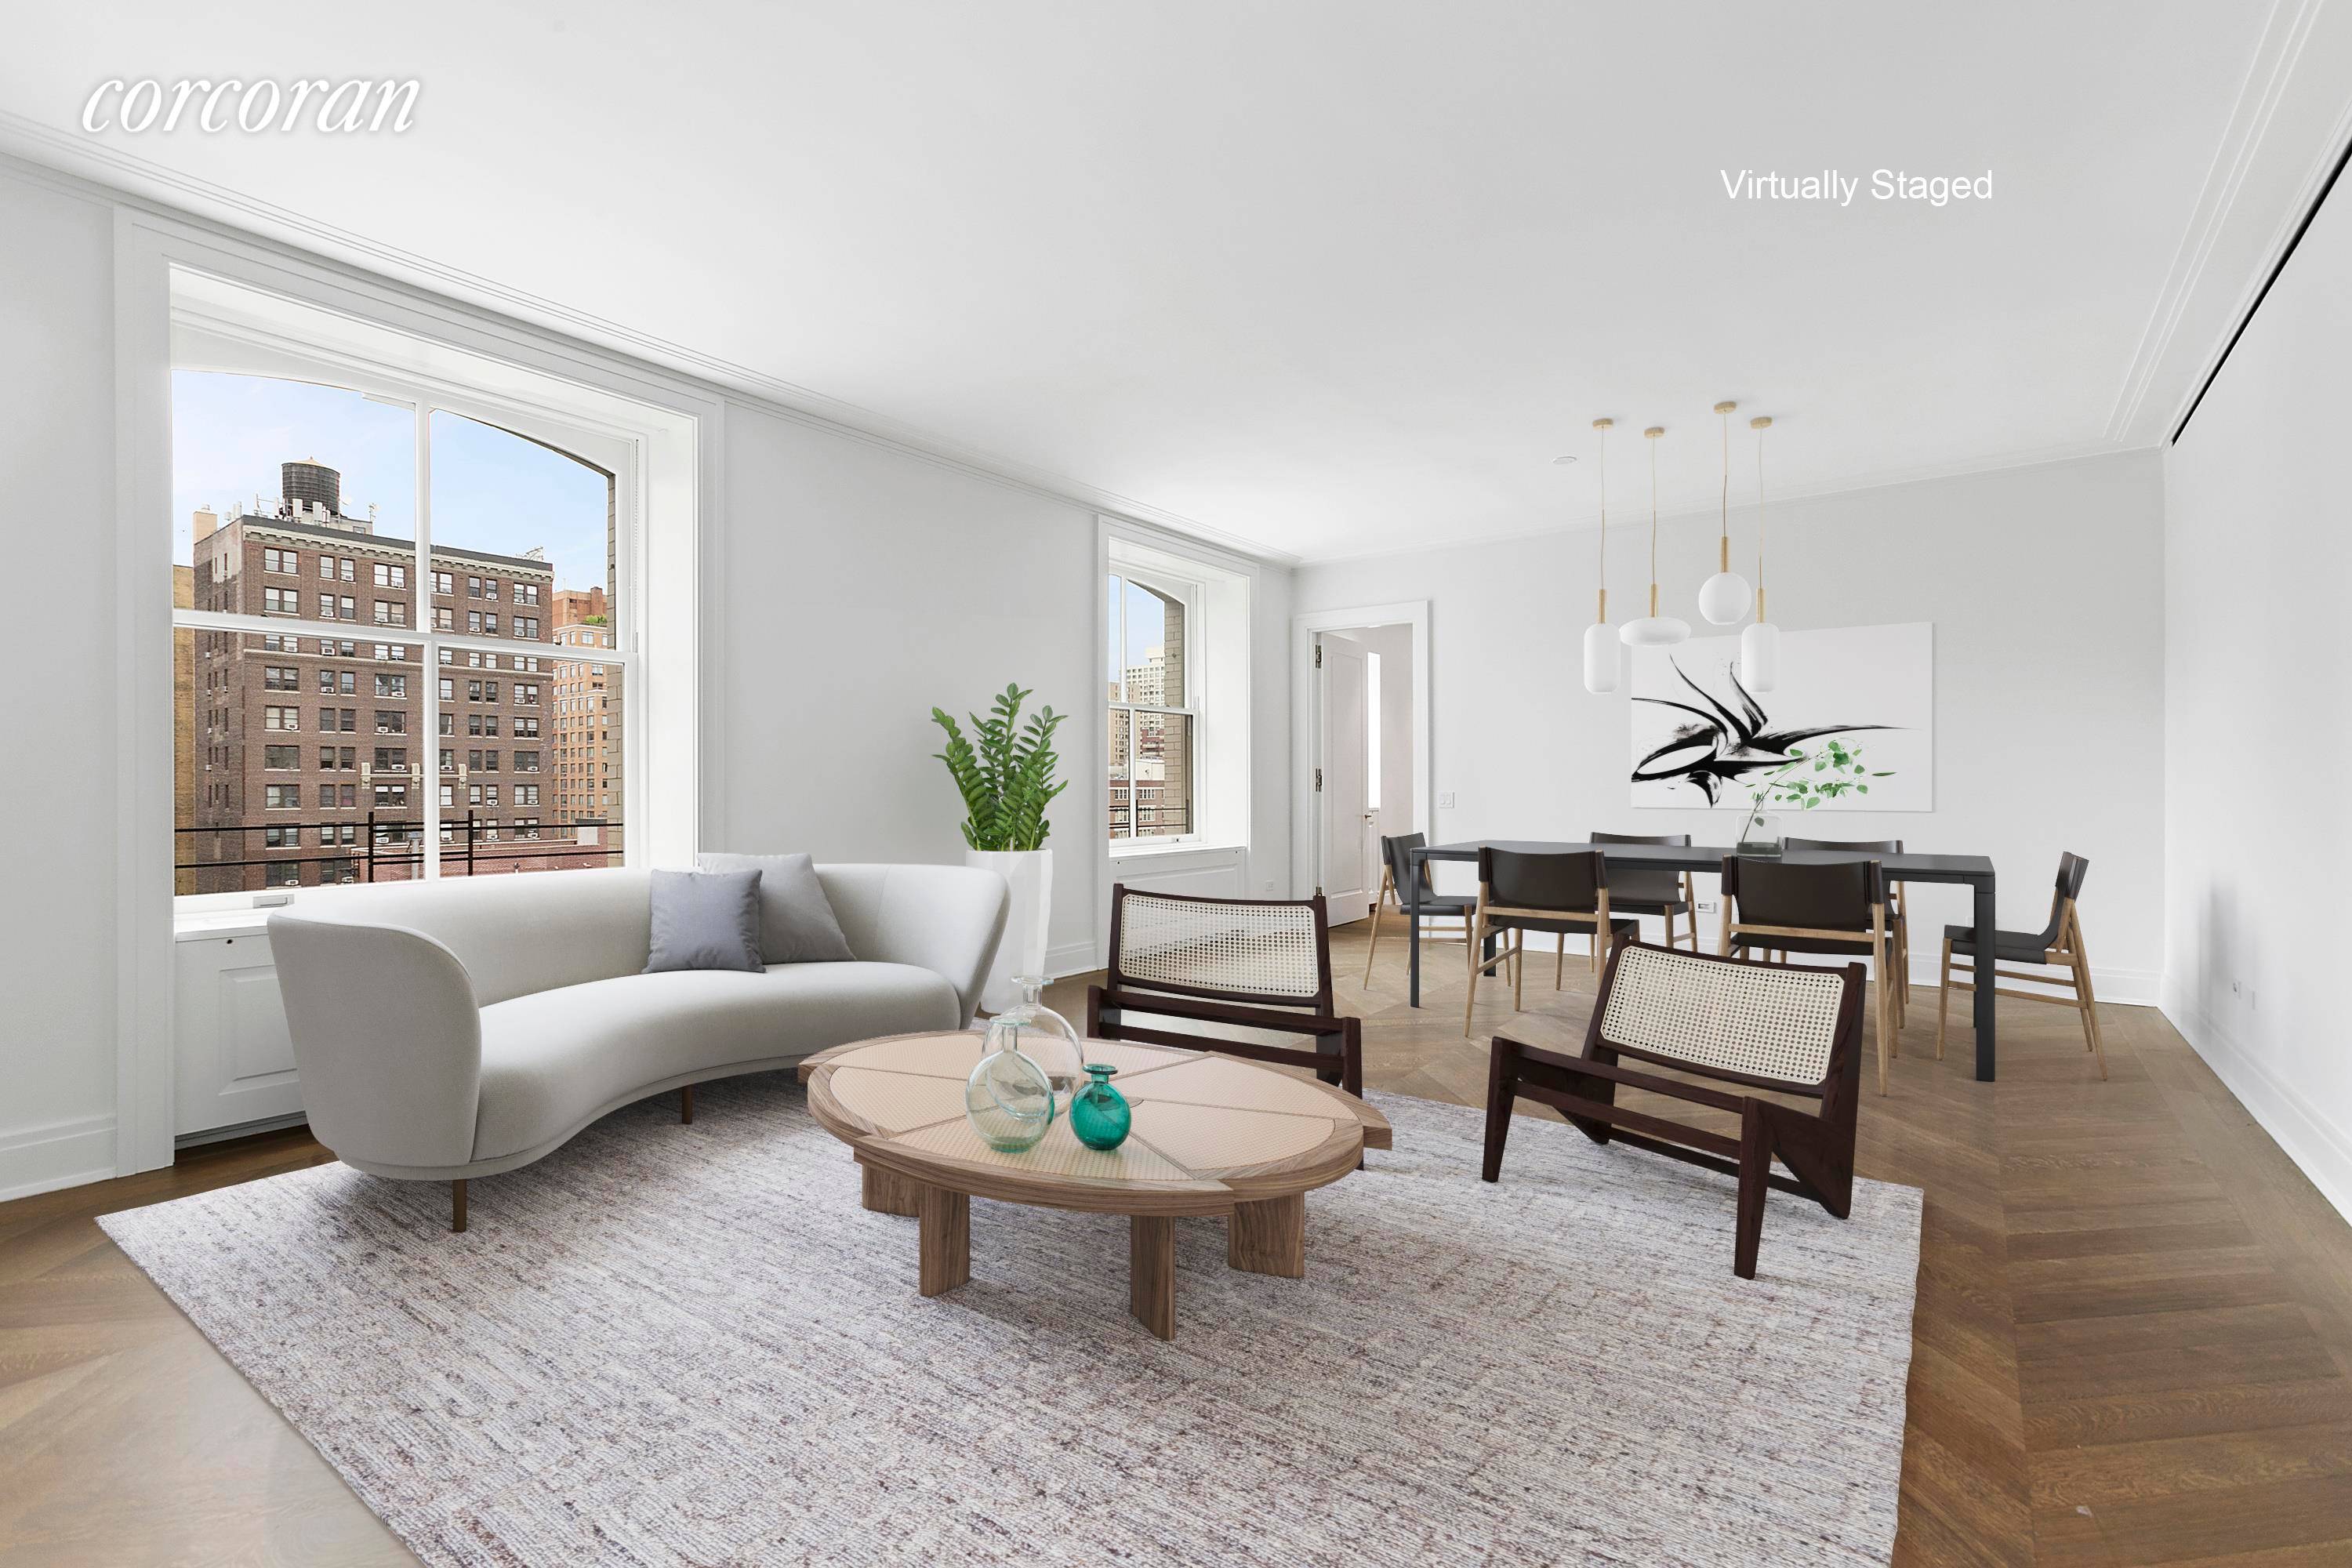 Presenting a unique opportunity to purchase a never lived in and impeccably renovated home at the Belnord one of the Upper West Side's most spectacular pre War buildings that has ...